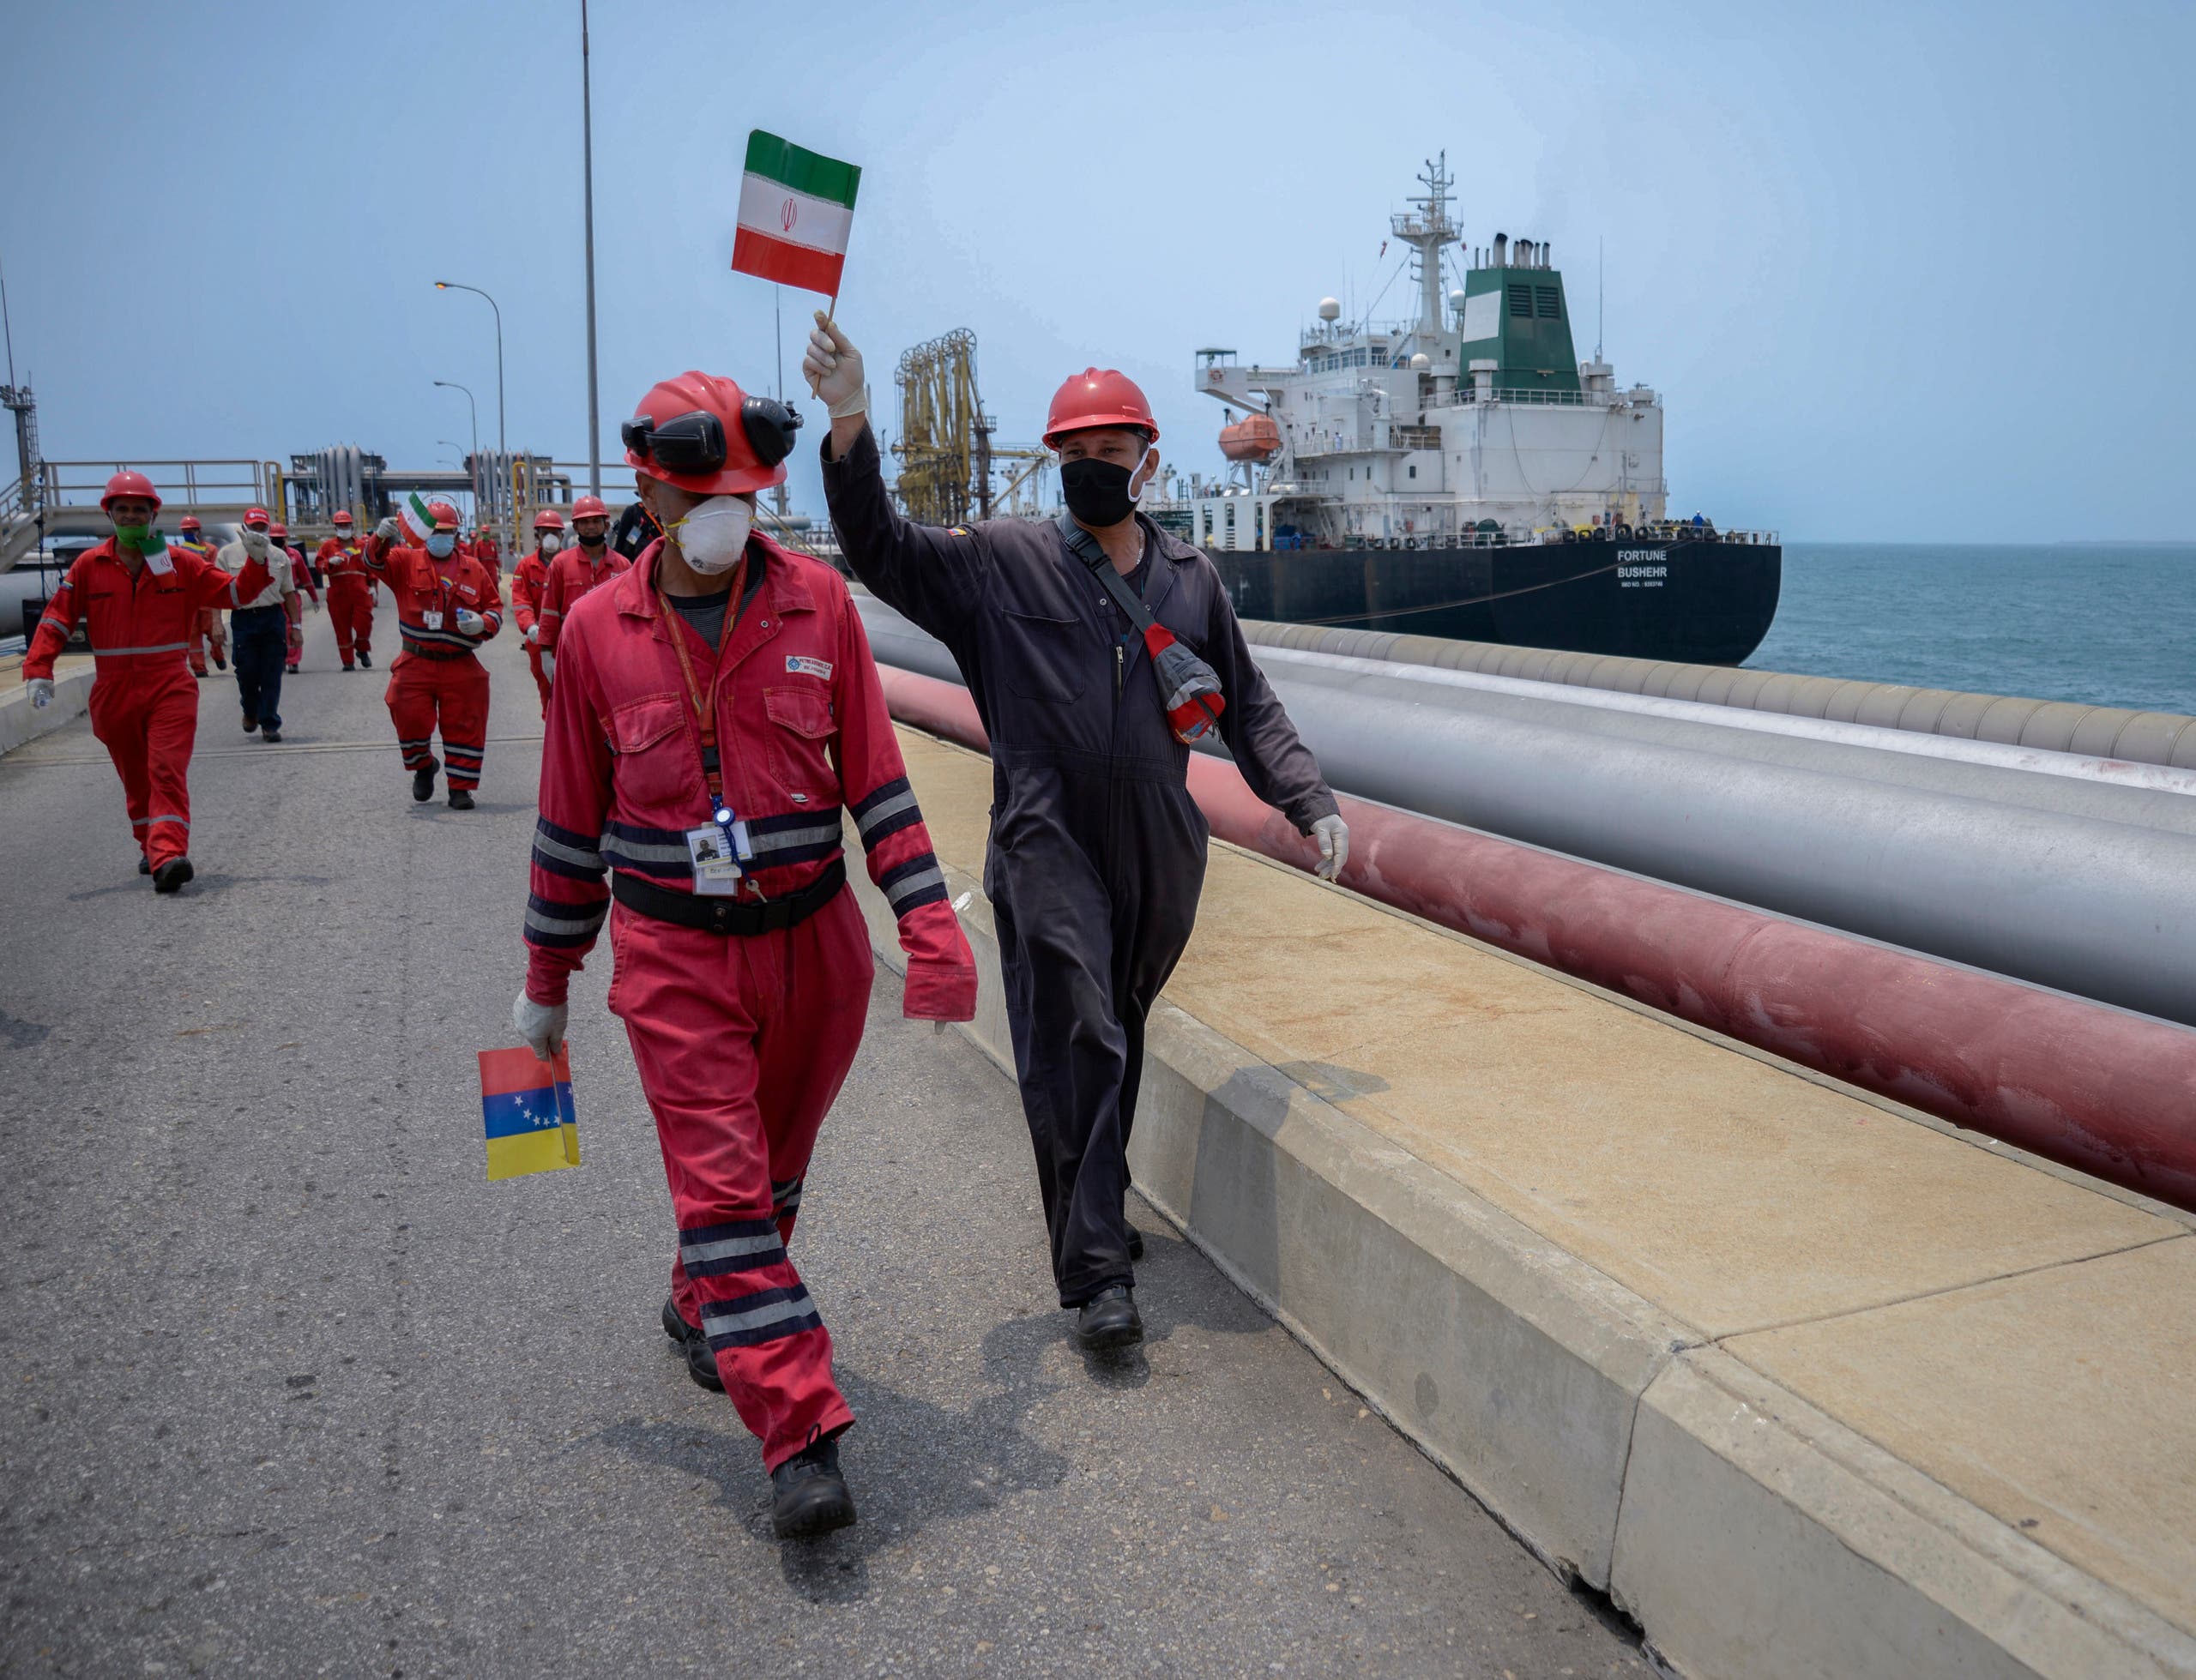 A worker of the Venezuelan state oil company PDVSA waves an Iranian flag as the Iranian-flagged oil tanker Fortune docks in Puerto Cabello, Venezuela, on May 25, 2020. (AFP)